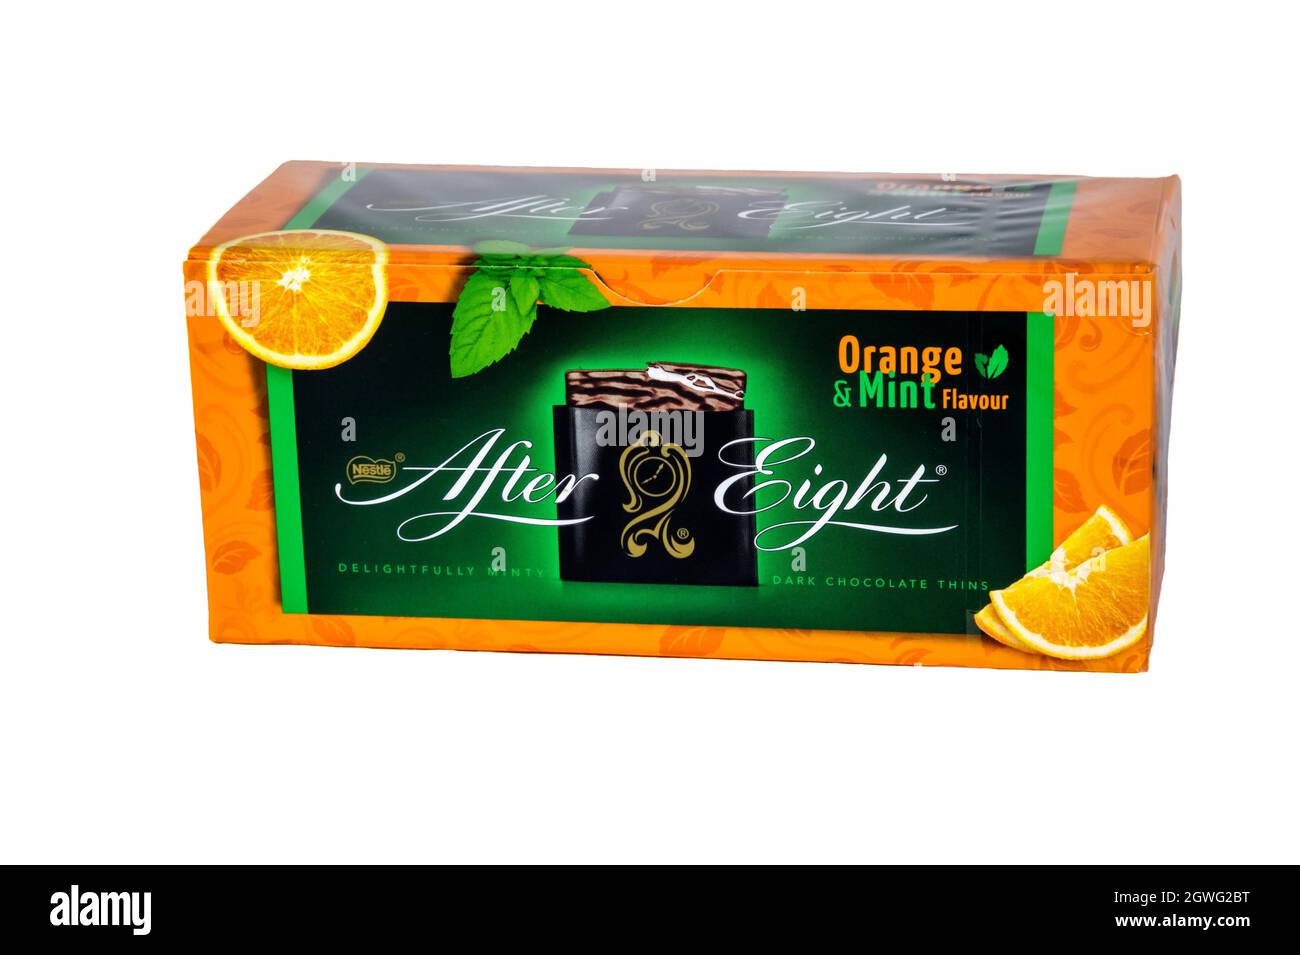 A box of limited edition Orange & Mint flavour After Eight mints. Stock Photo